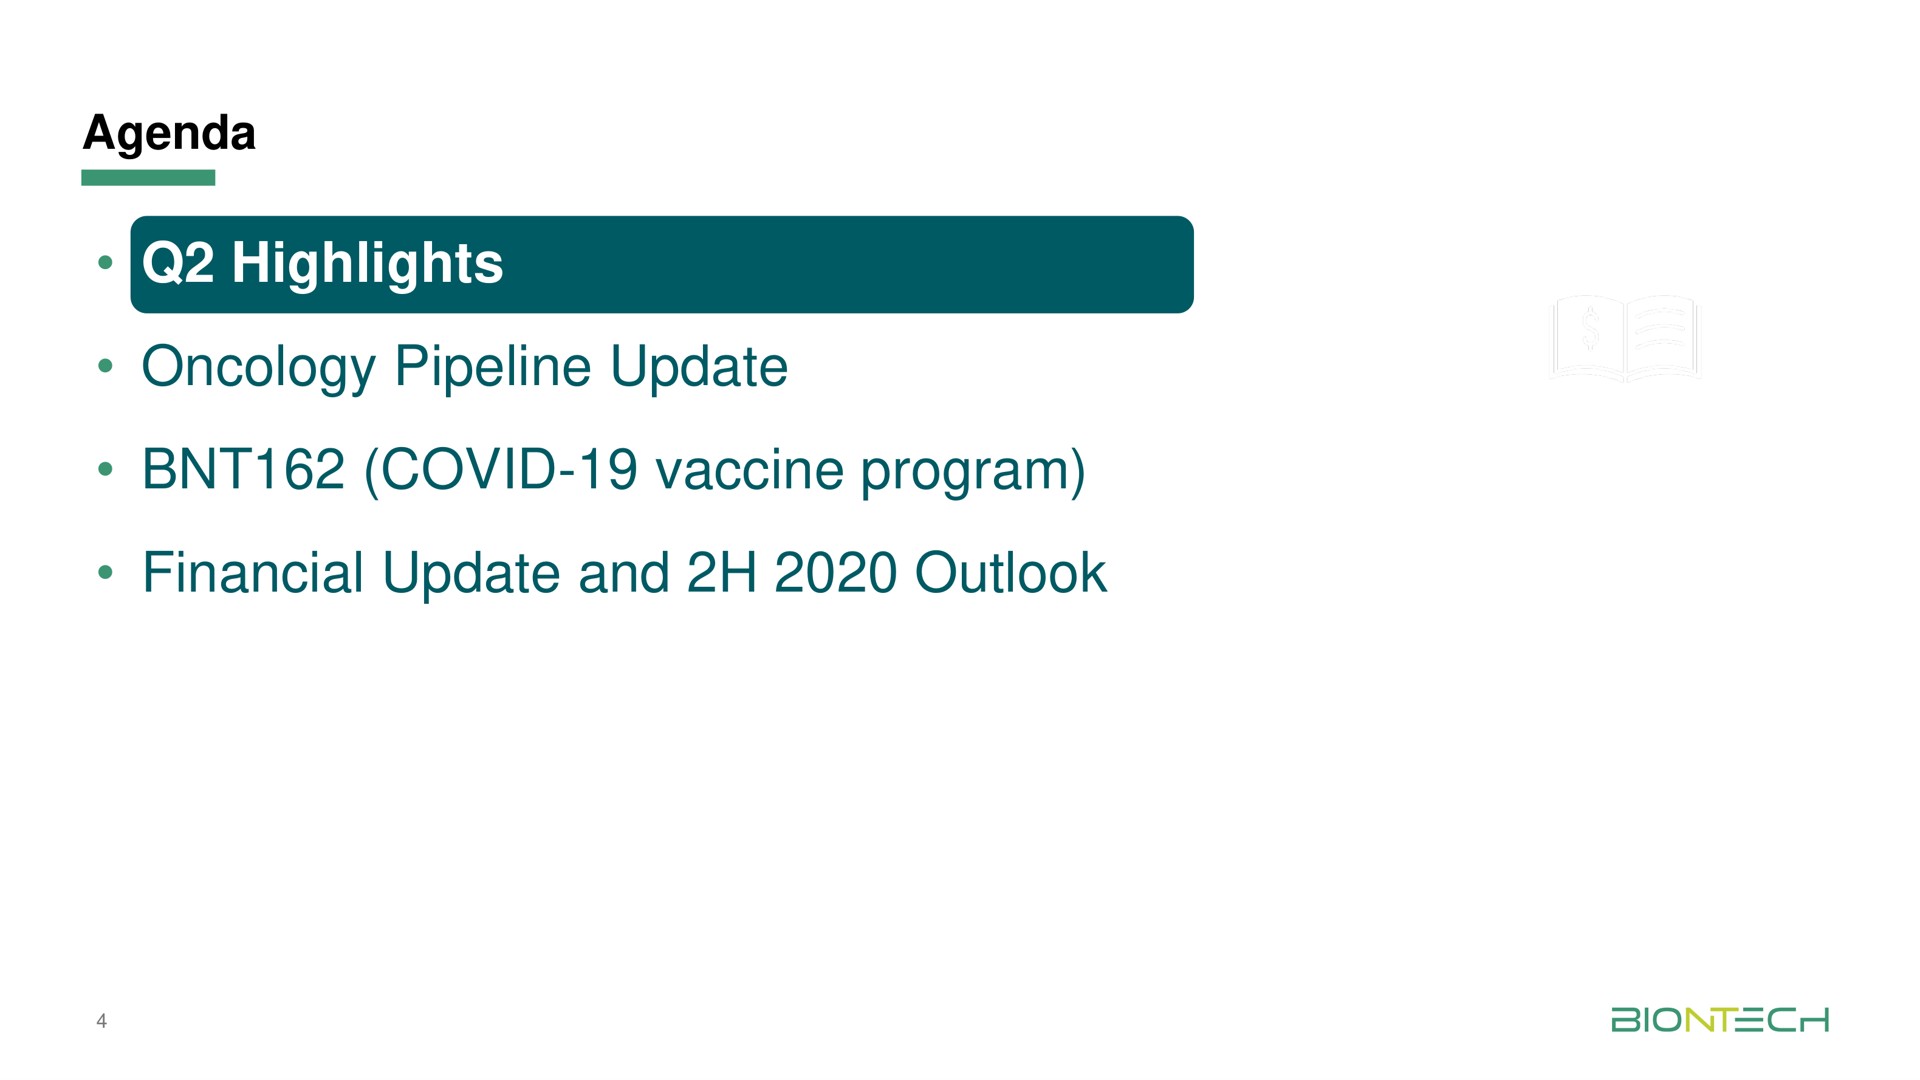 agenda highlights oncology pipeline update covid vaccine program financial update and outlook | BioNTech